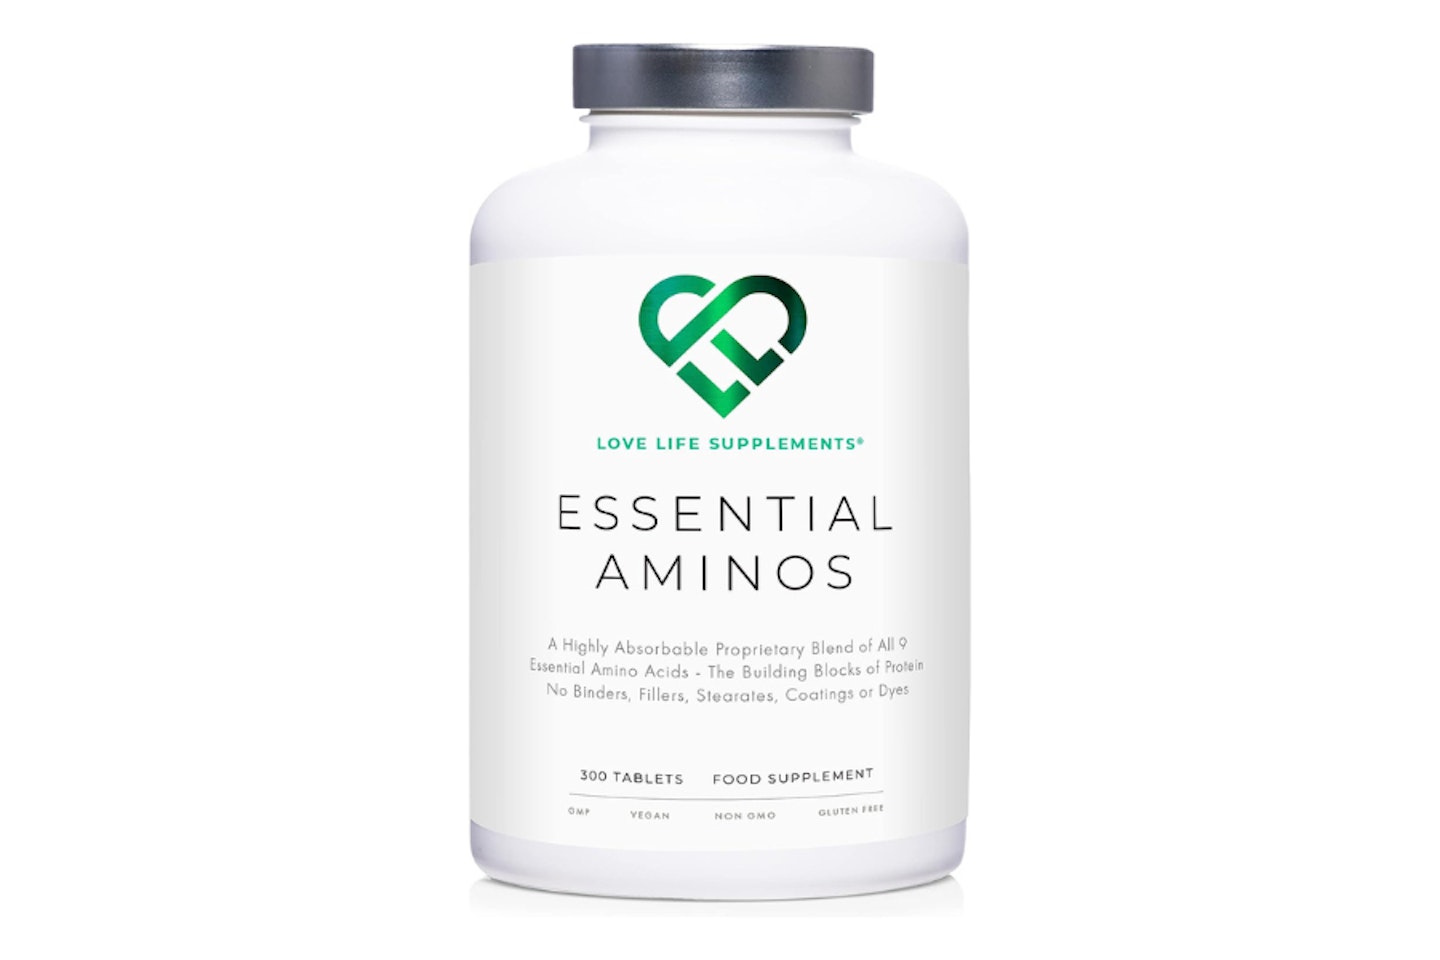 Essential Amino Acids by LLS - All 9 EAA Amino Acids with All 3 BCAA's 